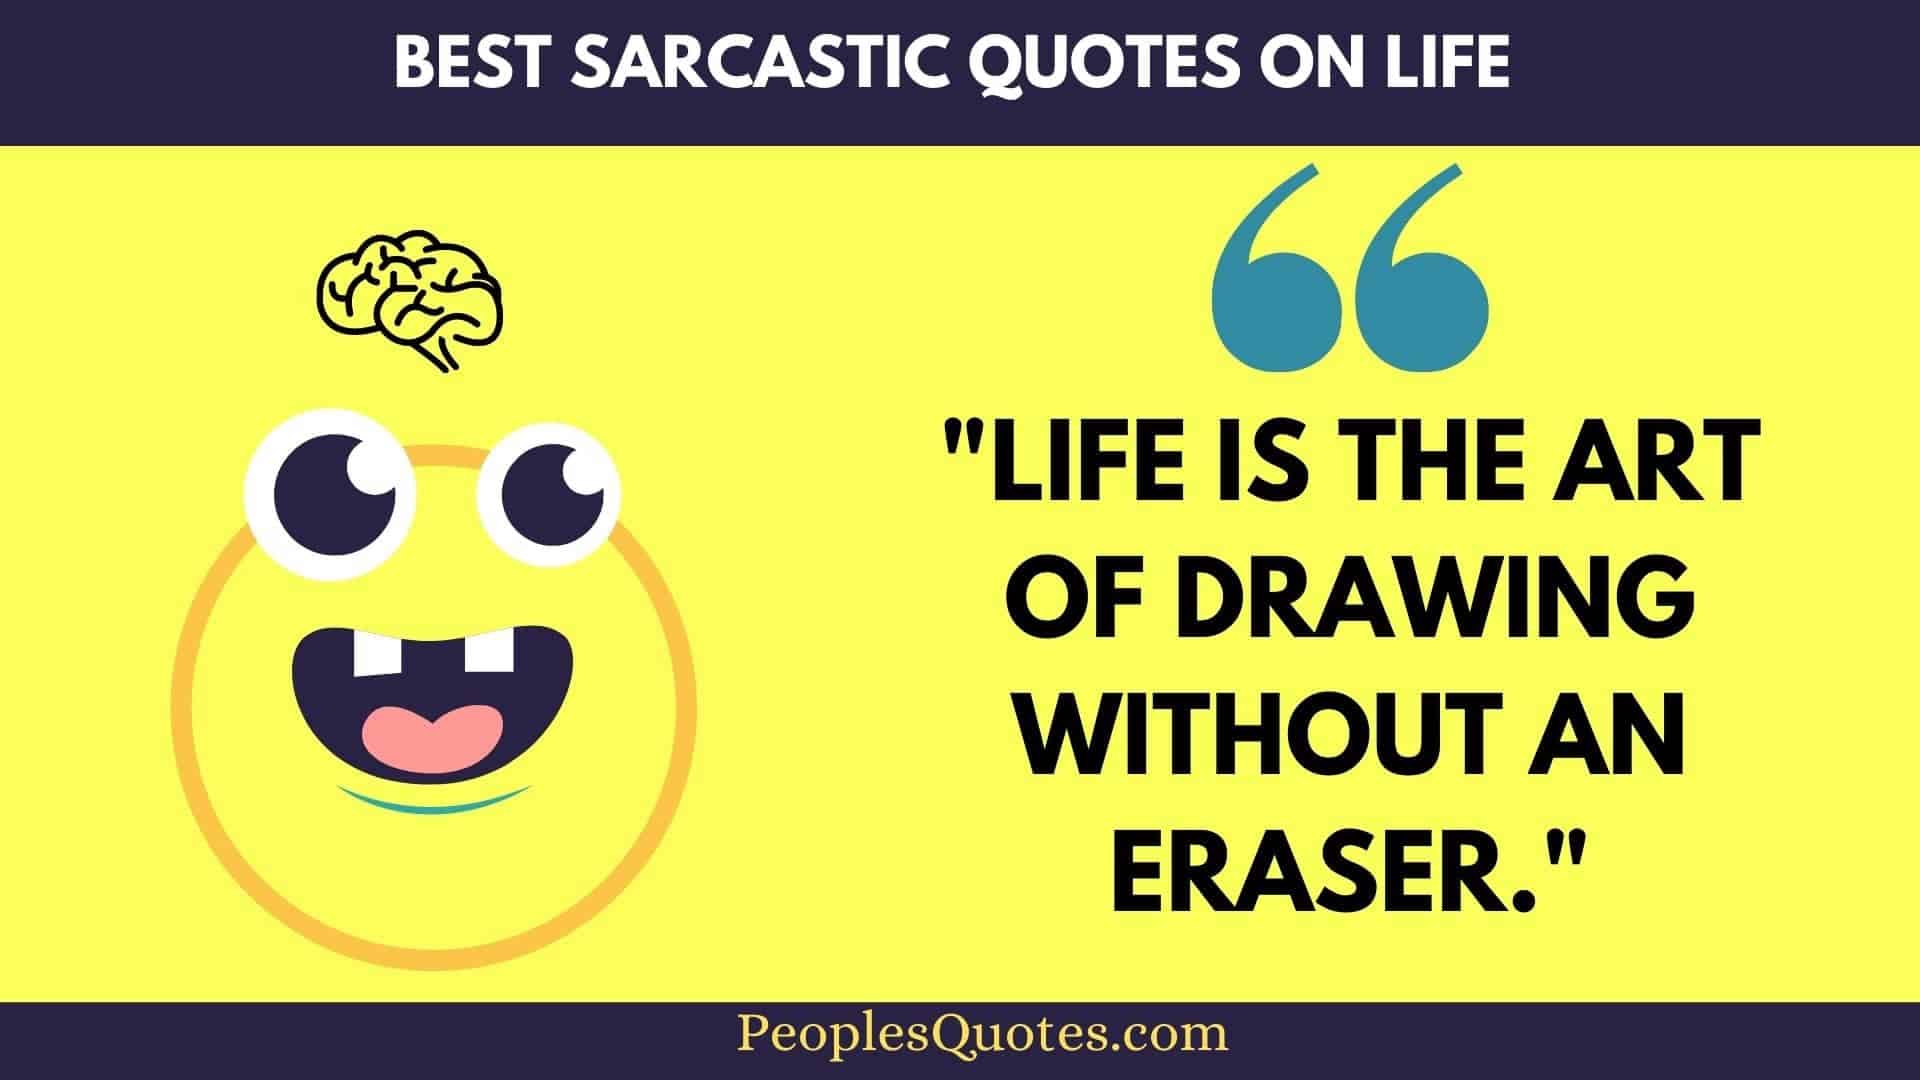 The Best Sarcastic Quotes on Life